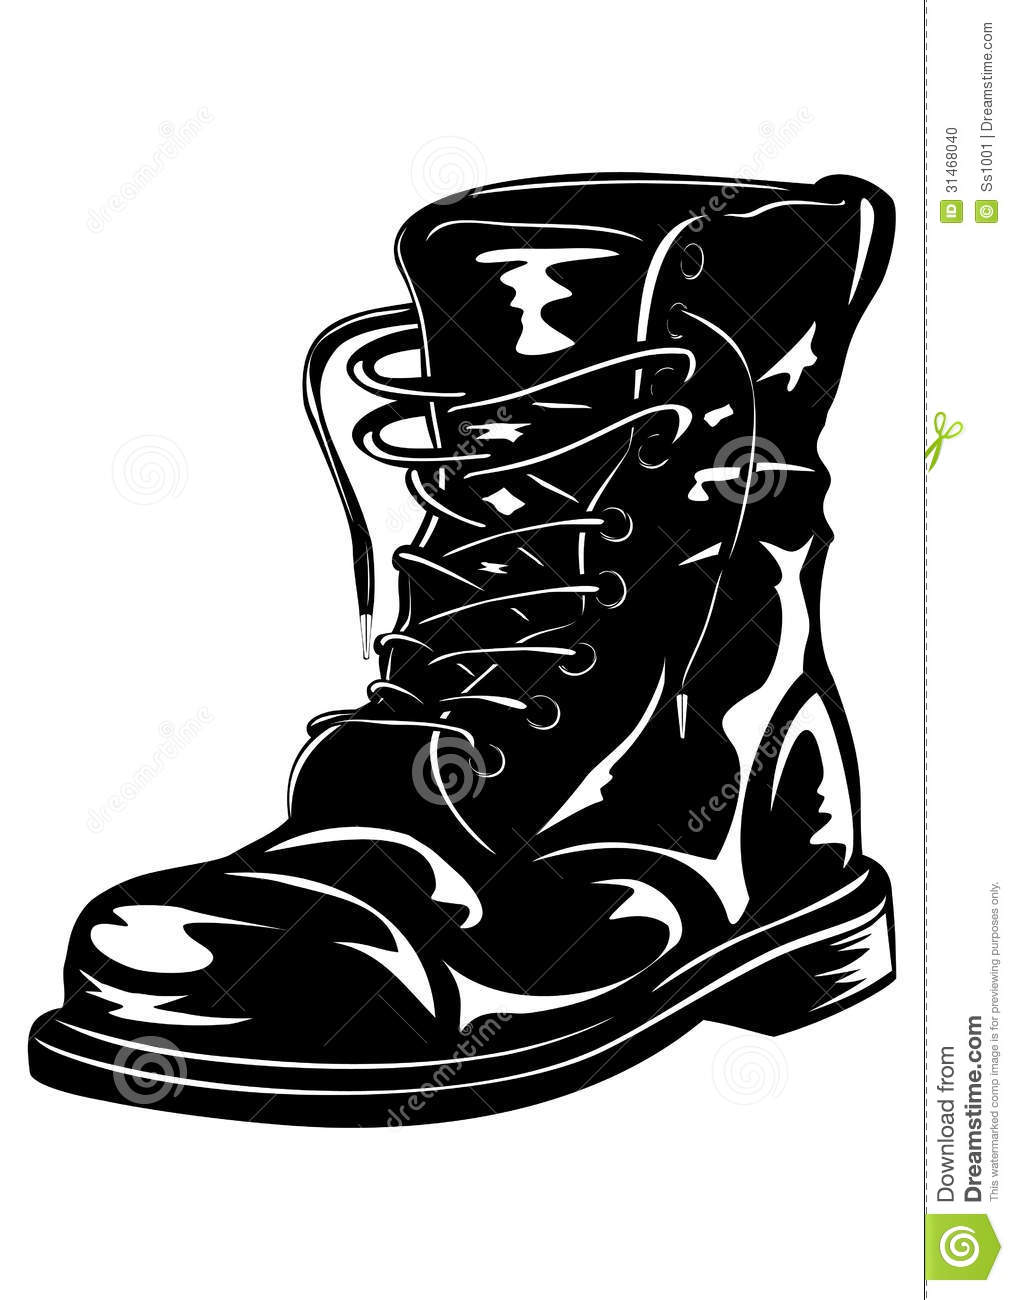 Army boots clipart 5 » Clipart Station.